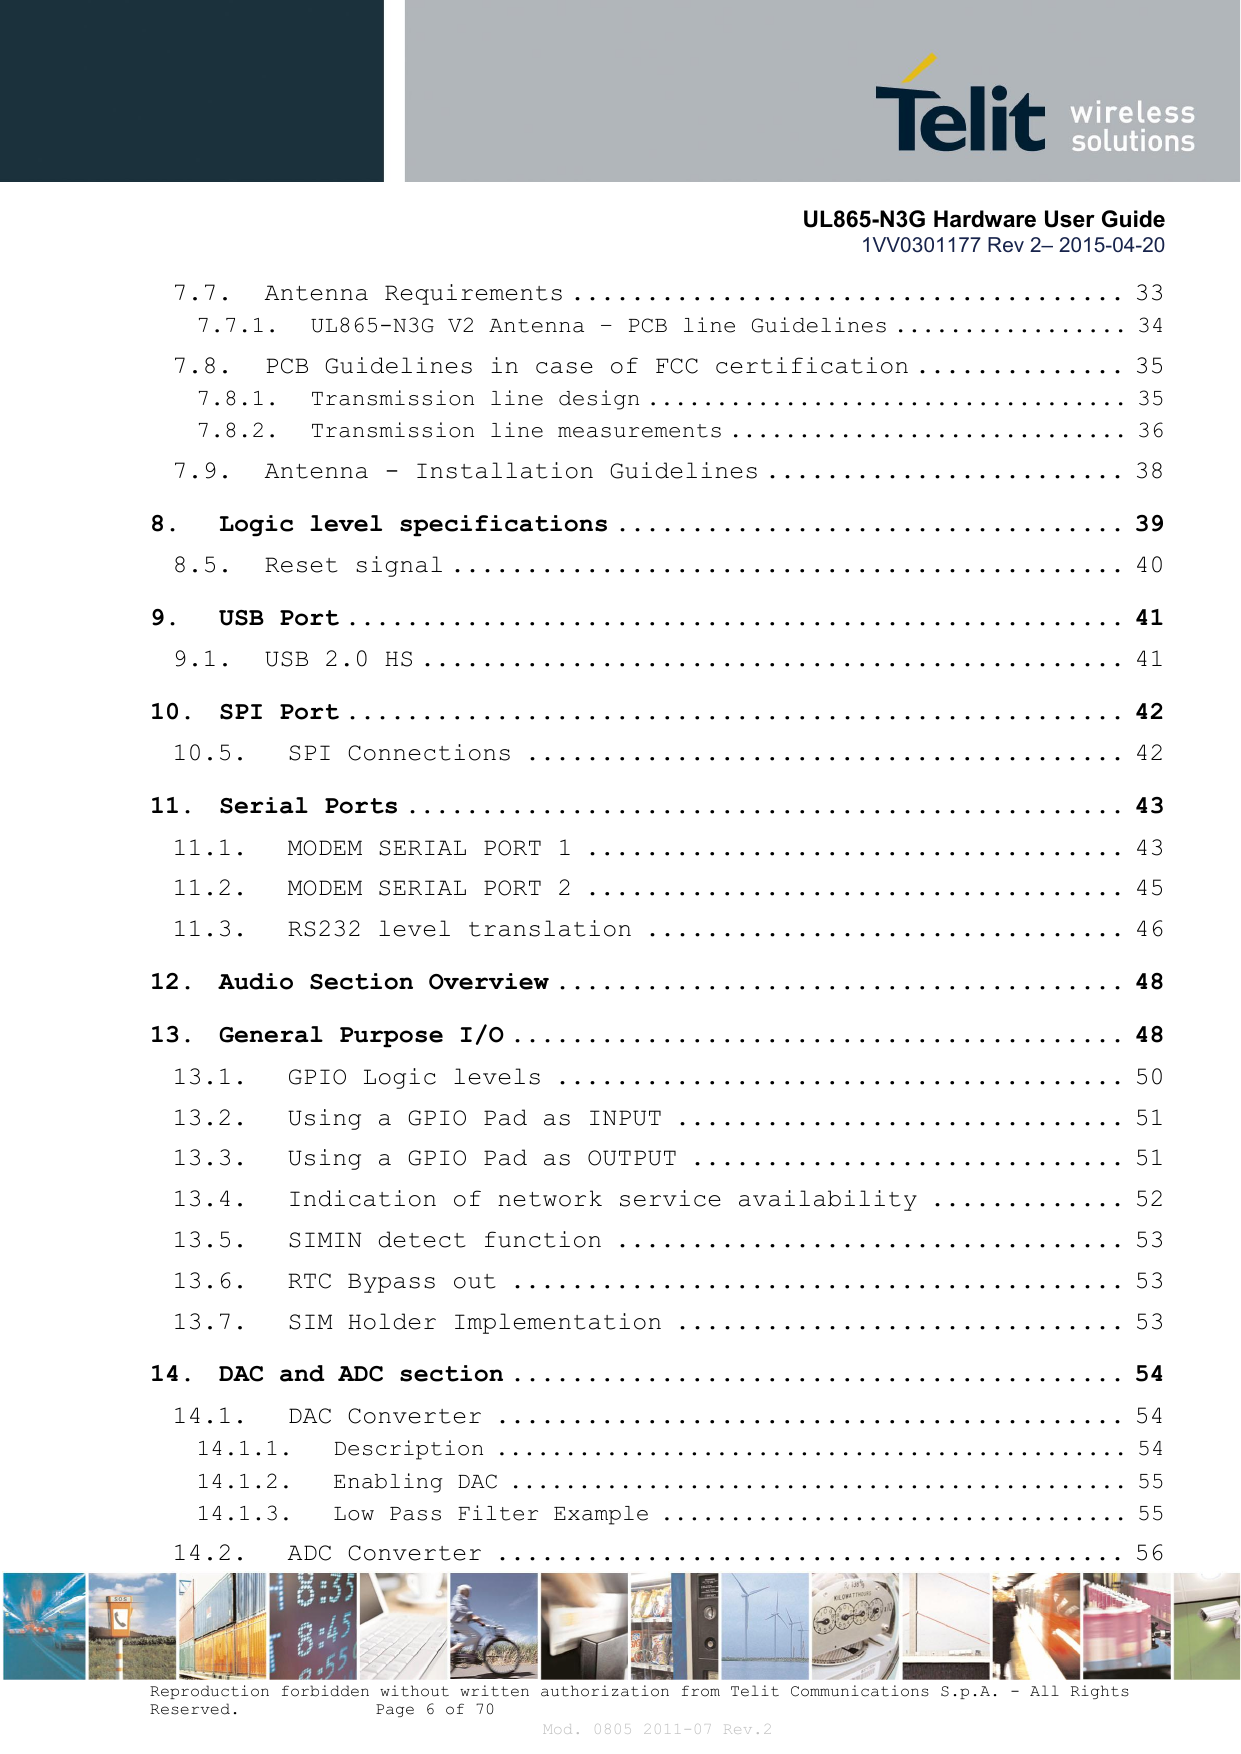       UL865-N3G Hardware User Guide 1VV0301177 Rev 2– 2015-04-20  Reproduction forbidden without written authorization from Telit Communications S.p.A. - All Rights Reserved.    Page 6 of 70 Mod. 0805 2011-07 Rev.2 7.7. Antenna Requirements ..................................... 33 7.7.1. UL865-N3G V2 Antenna – PCB line Guidelines ................. 34 7.8. PCB Guidelines in case of FCC certification .............. 35 7.8.1. Transmission line design ................................... 35 7.8.2. Transmission line measurements ............................. 36 7.9. Antenna - Installation Guidelines ........................ 38 8. Logic level specifications .................................. 39 8.5. Reset signal ............................................. 40 9. USB Port .................................................... 41 9.1. USB 2.0 HS ............................................... 41 10. SPI Port .................................................... 42 10.5. SPI Connections ........................................ 42 11. Serial Ports ................................................ 43 11.1. MODEM SERIAL PORT 1 .................................... 43 11.2. MODEM SERIAL PORT 2 .................................... 45 11.3. RS232 level translation ................................ 46 12. Audio Section Overview ...................................... 48 13. General Purpose I/O ......................................... 48 13.1. GPIO Logic levels ...................................... 50 13.2. Using a GPIO Pad as INPUT .............................. 51 13.3. Using a GPIO Pad as OUTPUT ............................. 51 13.4. Indication of network service availability ............. 52 13.5. SIMIN detect function .................................. 53 13.6. RTC Bypass out ......................................... 53 13.7. SIM Holder Implementation .............................. 53 14. DAC and ADC section ......................................... 54 14.1. DAC Converter .......................................... 54 14.1.1. Description .............................................. 54 14.1.2. Enabling DAC ............................................. 55 14.1.3. Low Pass Filter Example .................................. 55 14.2. ADC Converter .......................................... 56 